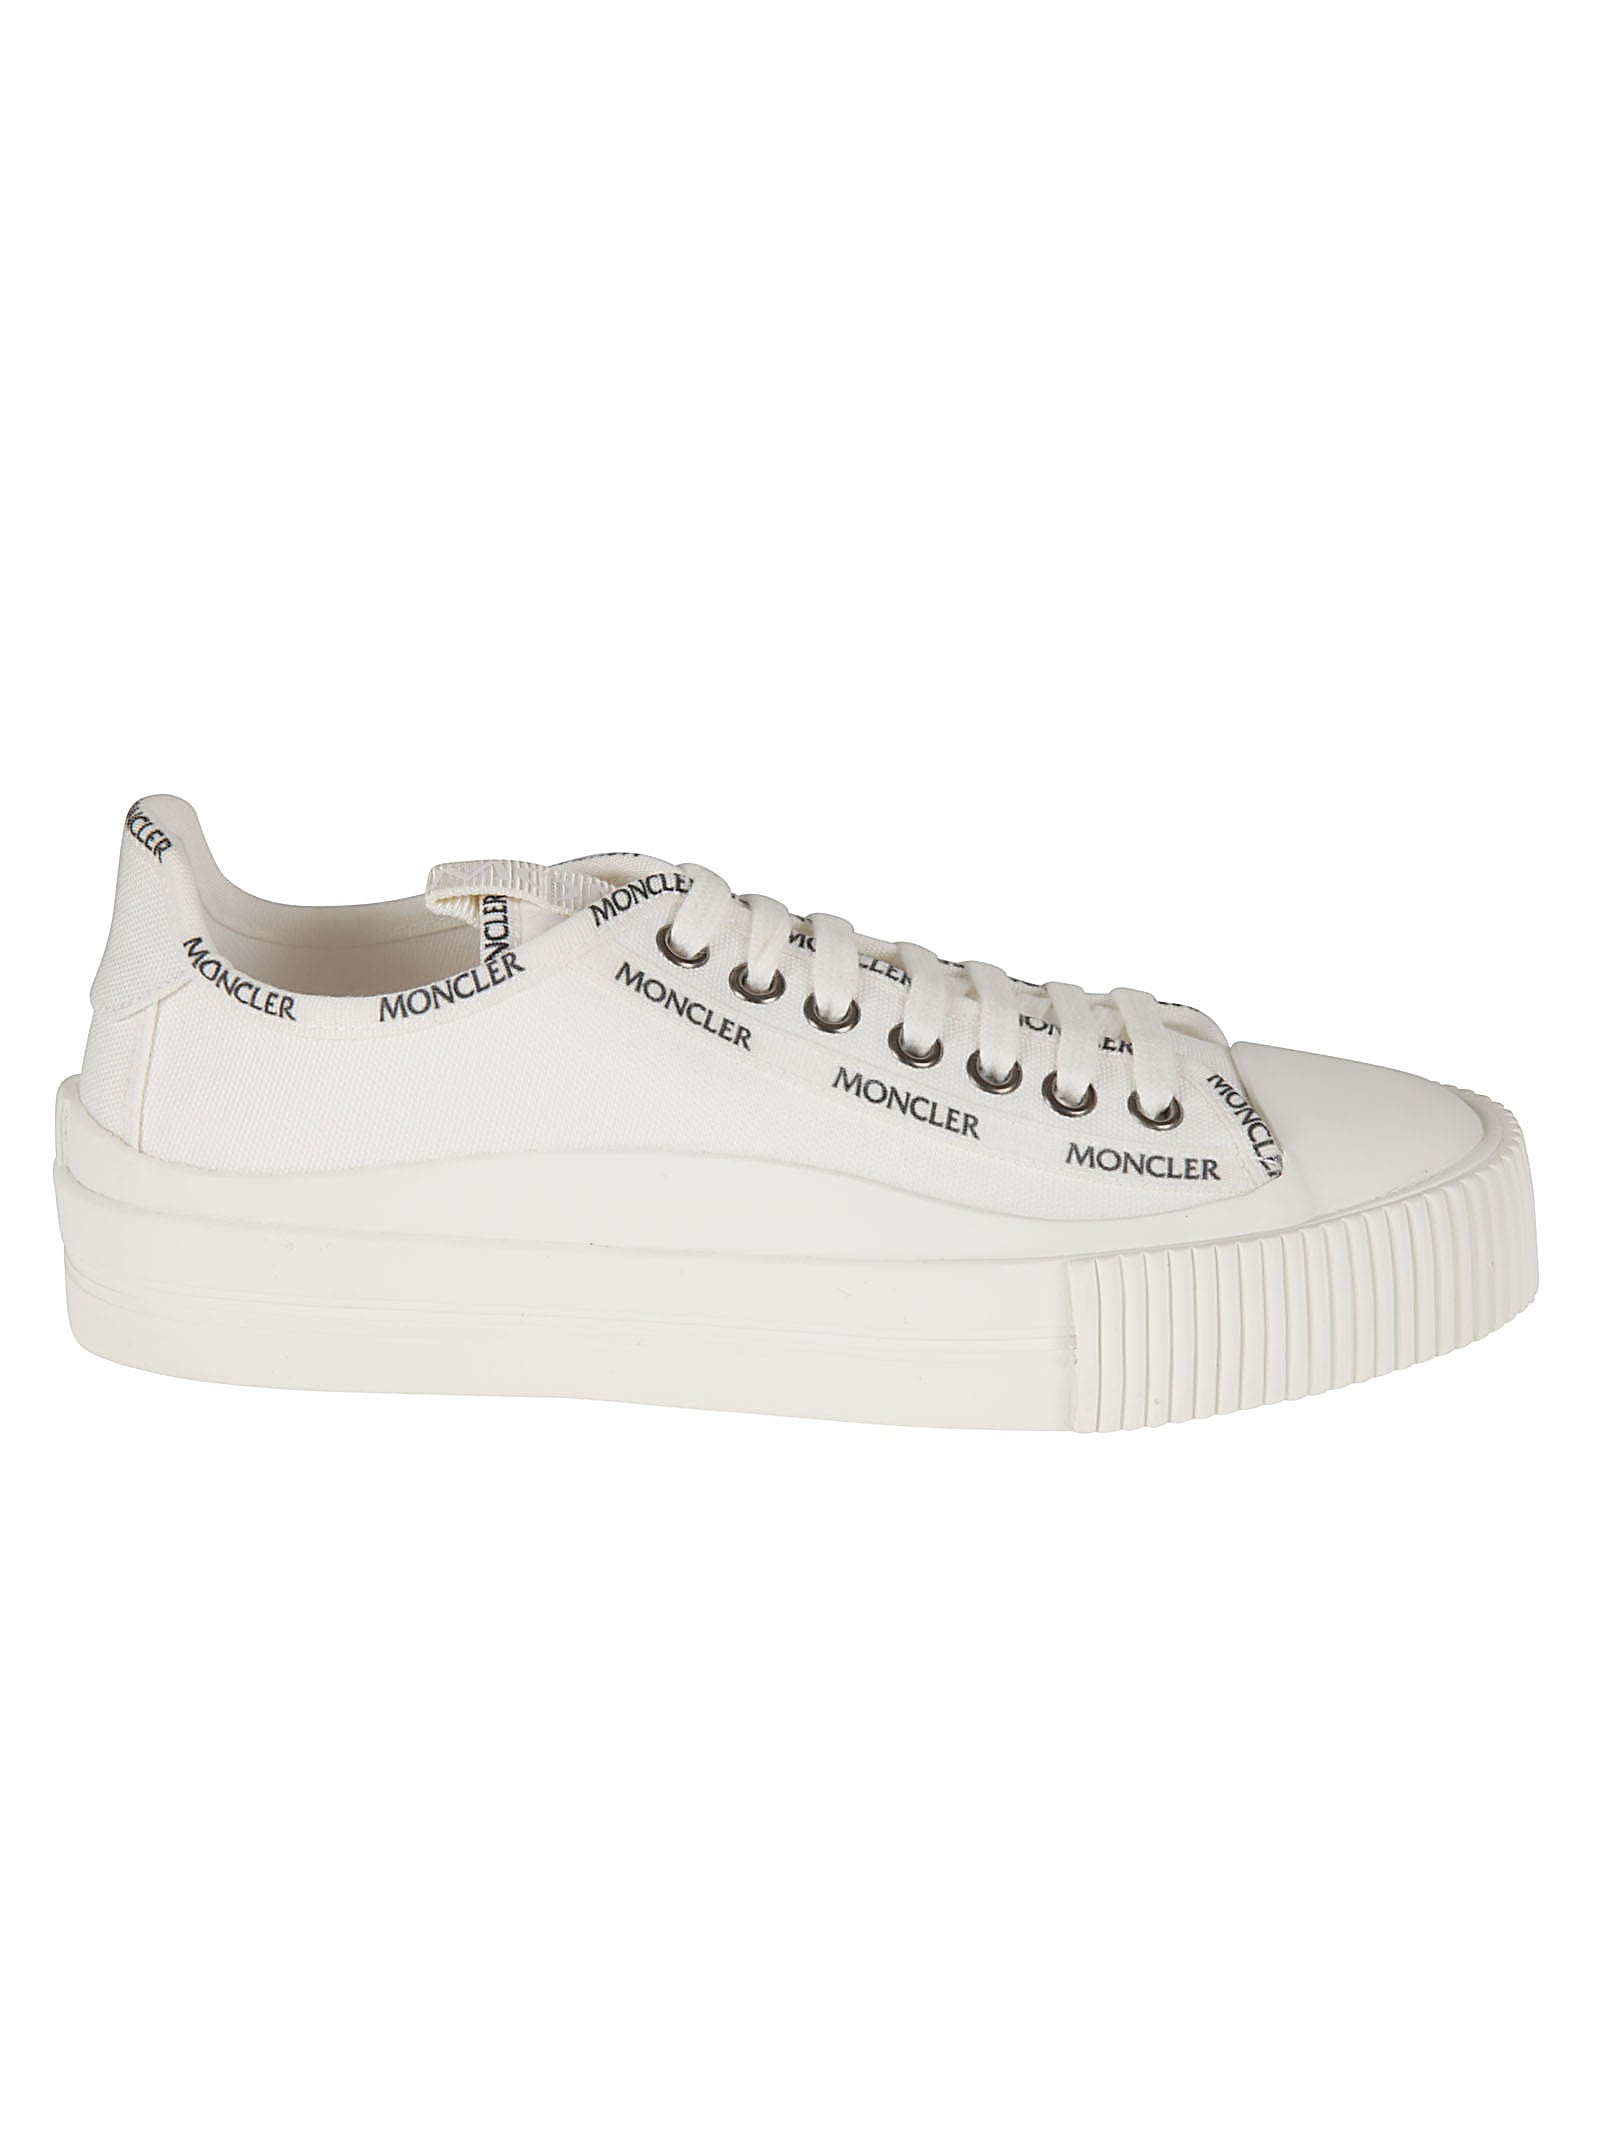 Buy Moncler Glissiere Sneakers online, shop Moncler shoes with free shipping